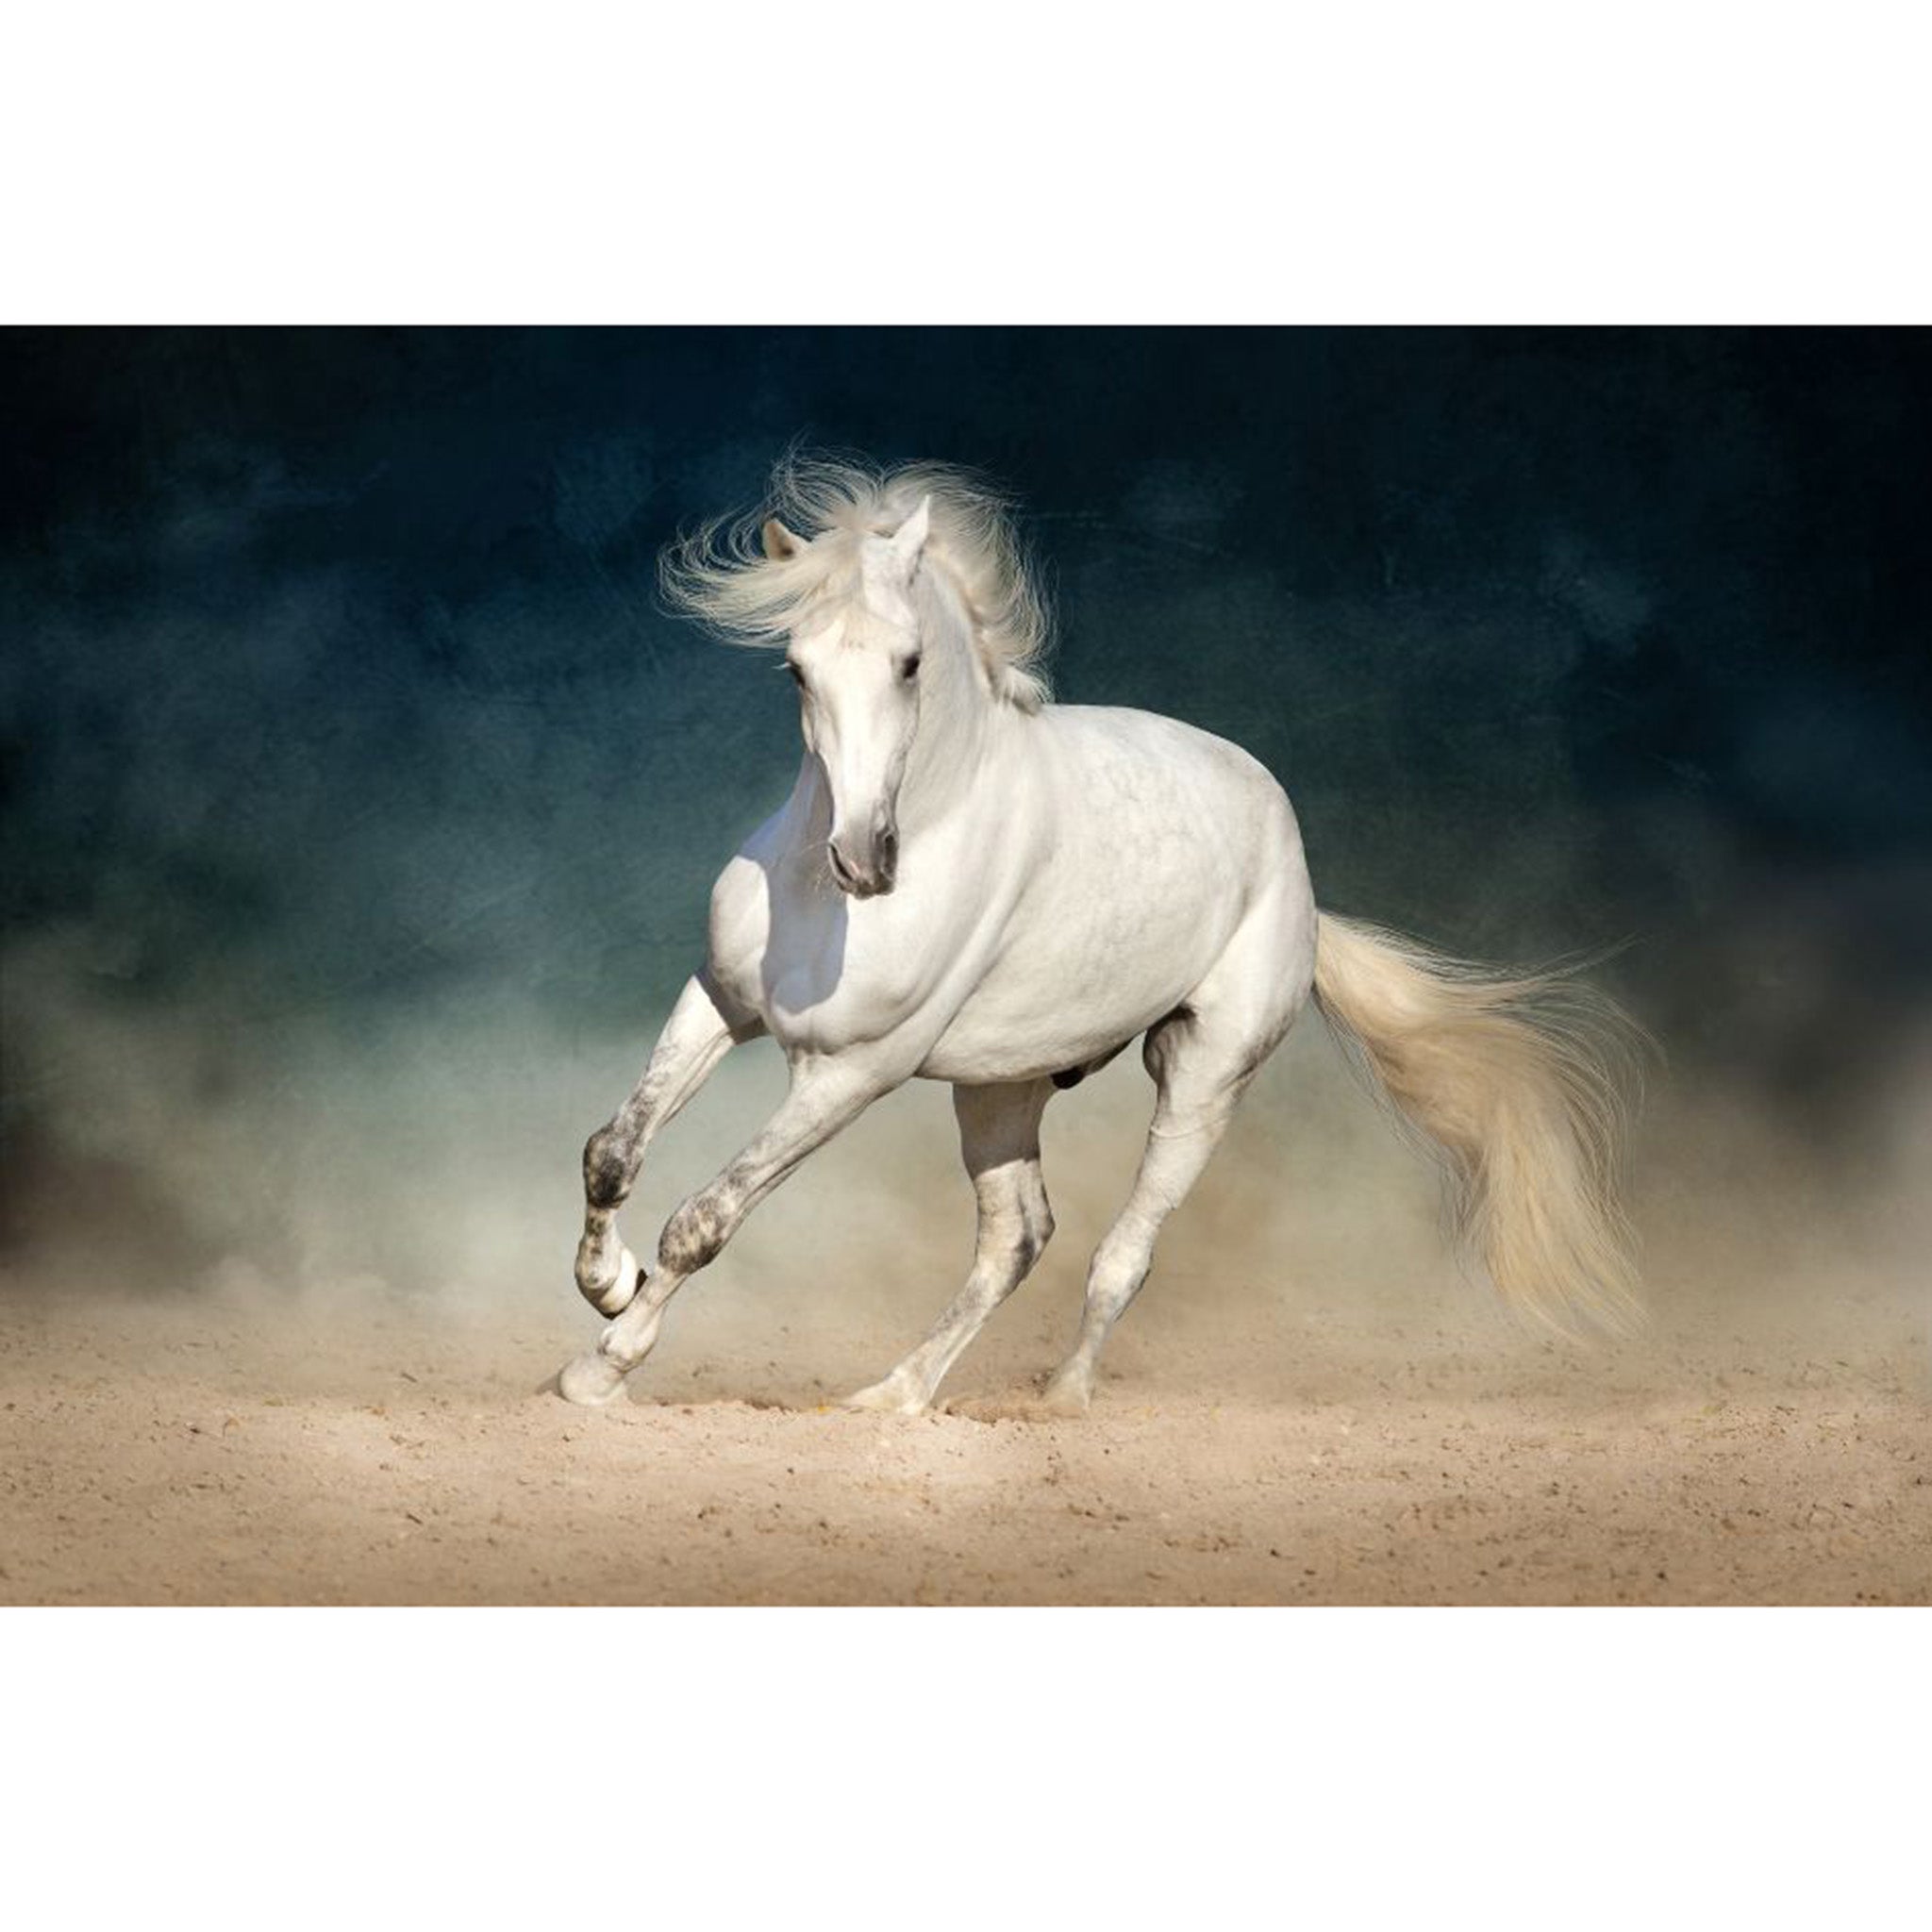 Tissue paper design that showcases a stunning White Arabian horse running gracefully across a dusty backdrop. White borders are on the top and bottom.